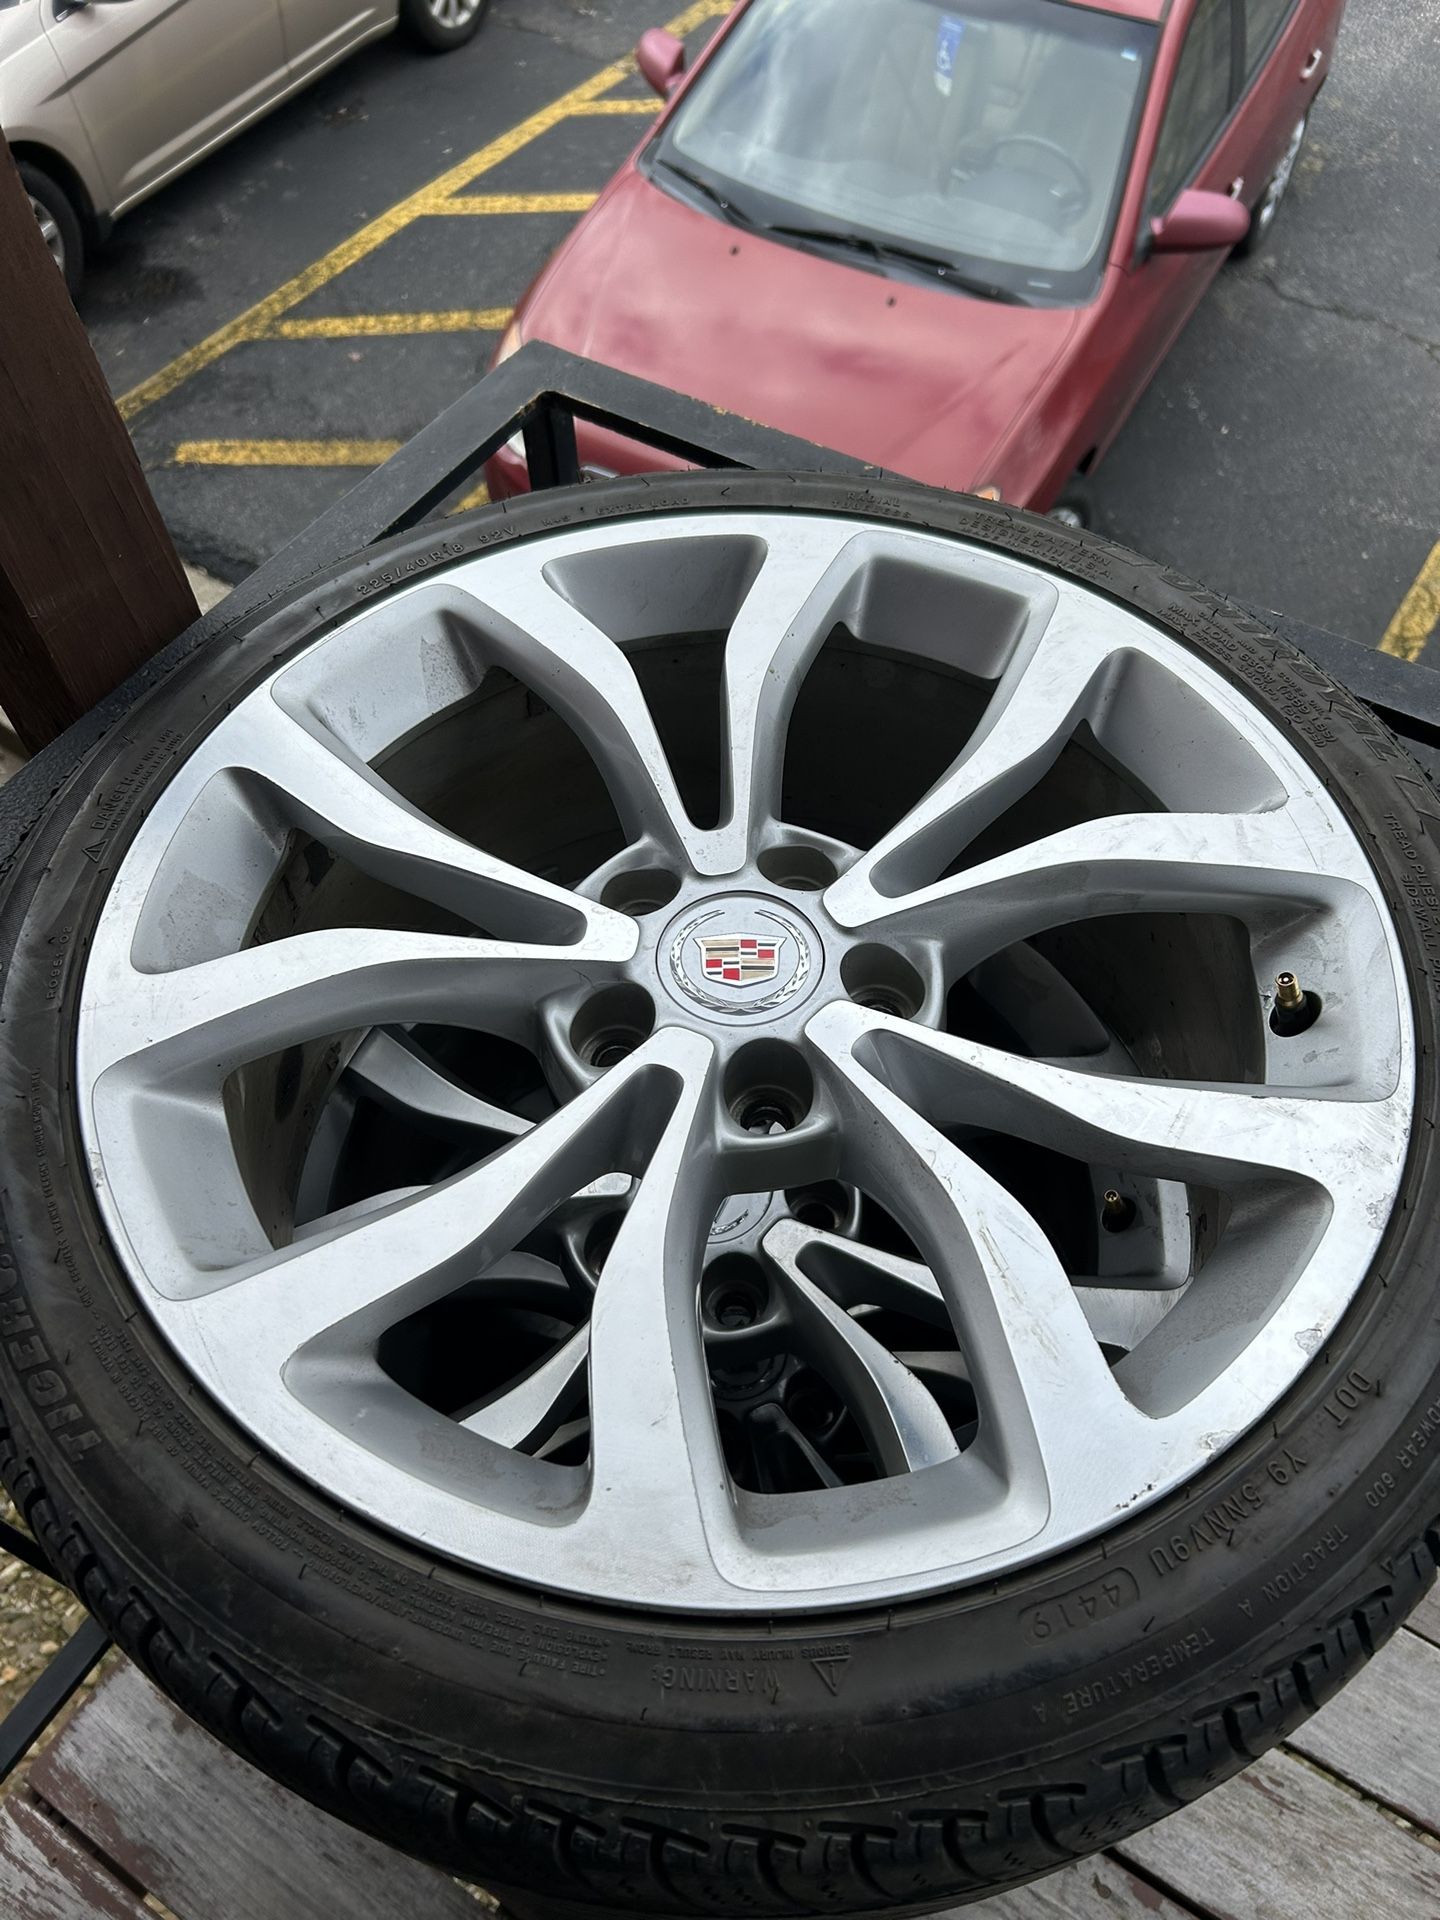 removed)-245 R 4018 inch Cadillac ATS rims and tires firm $1(contact info removed) for the set tires still like New